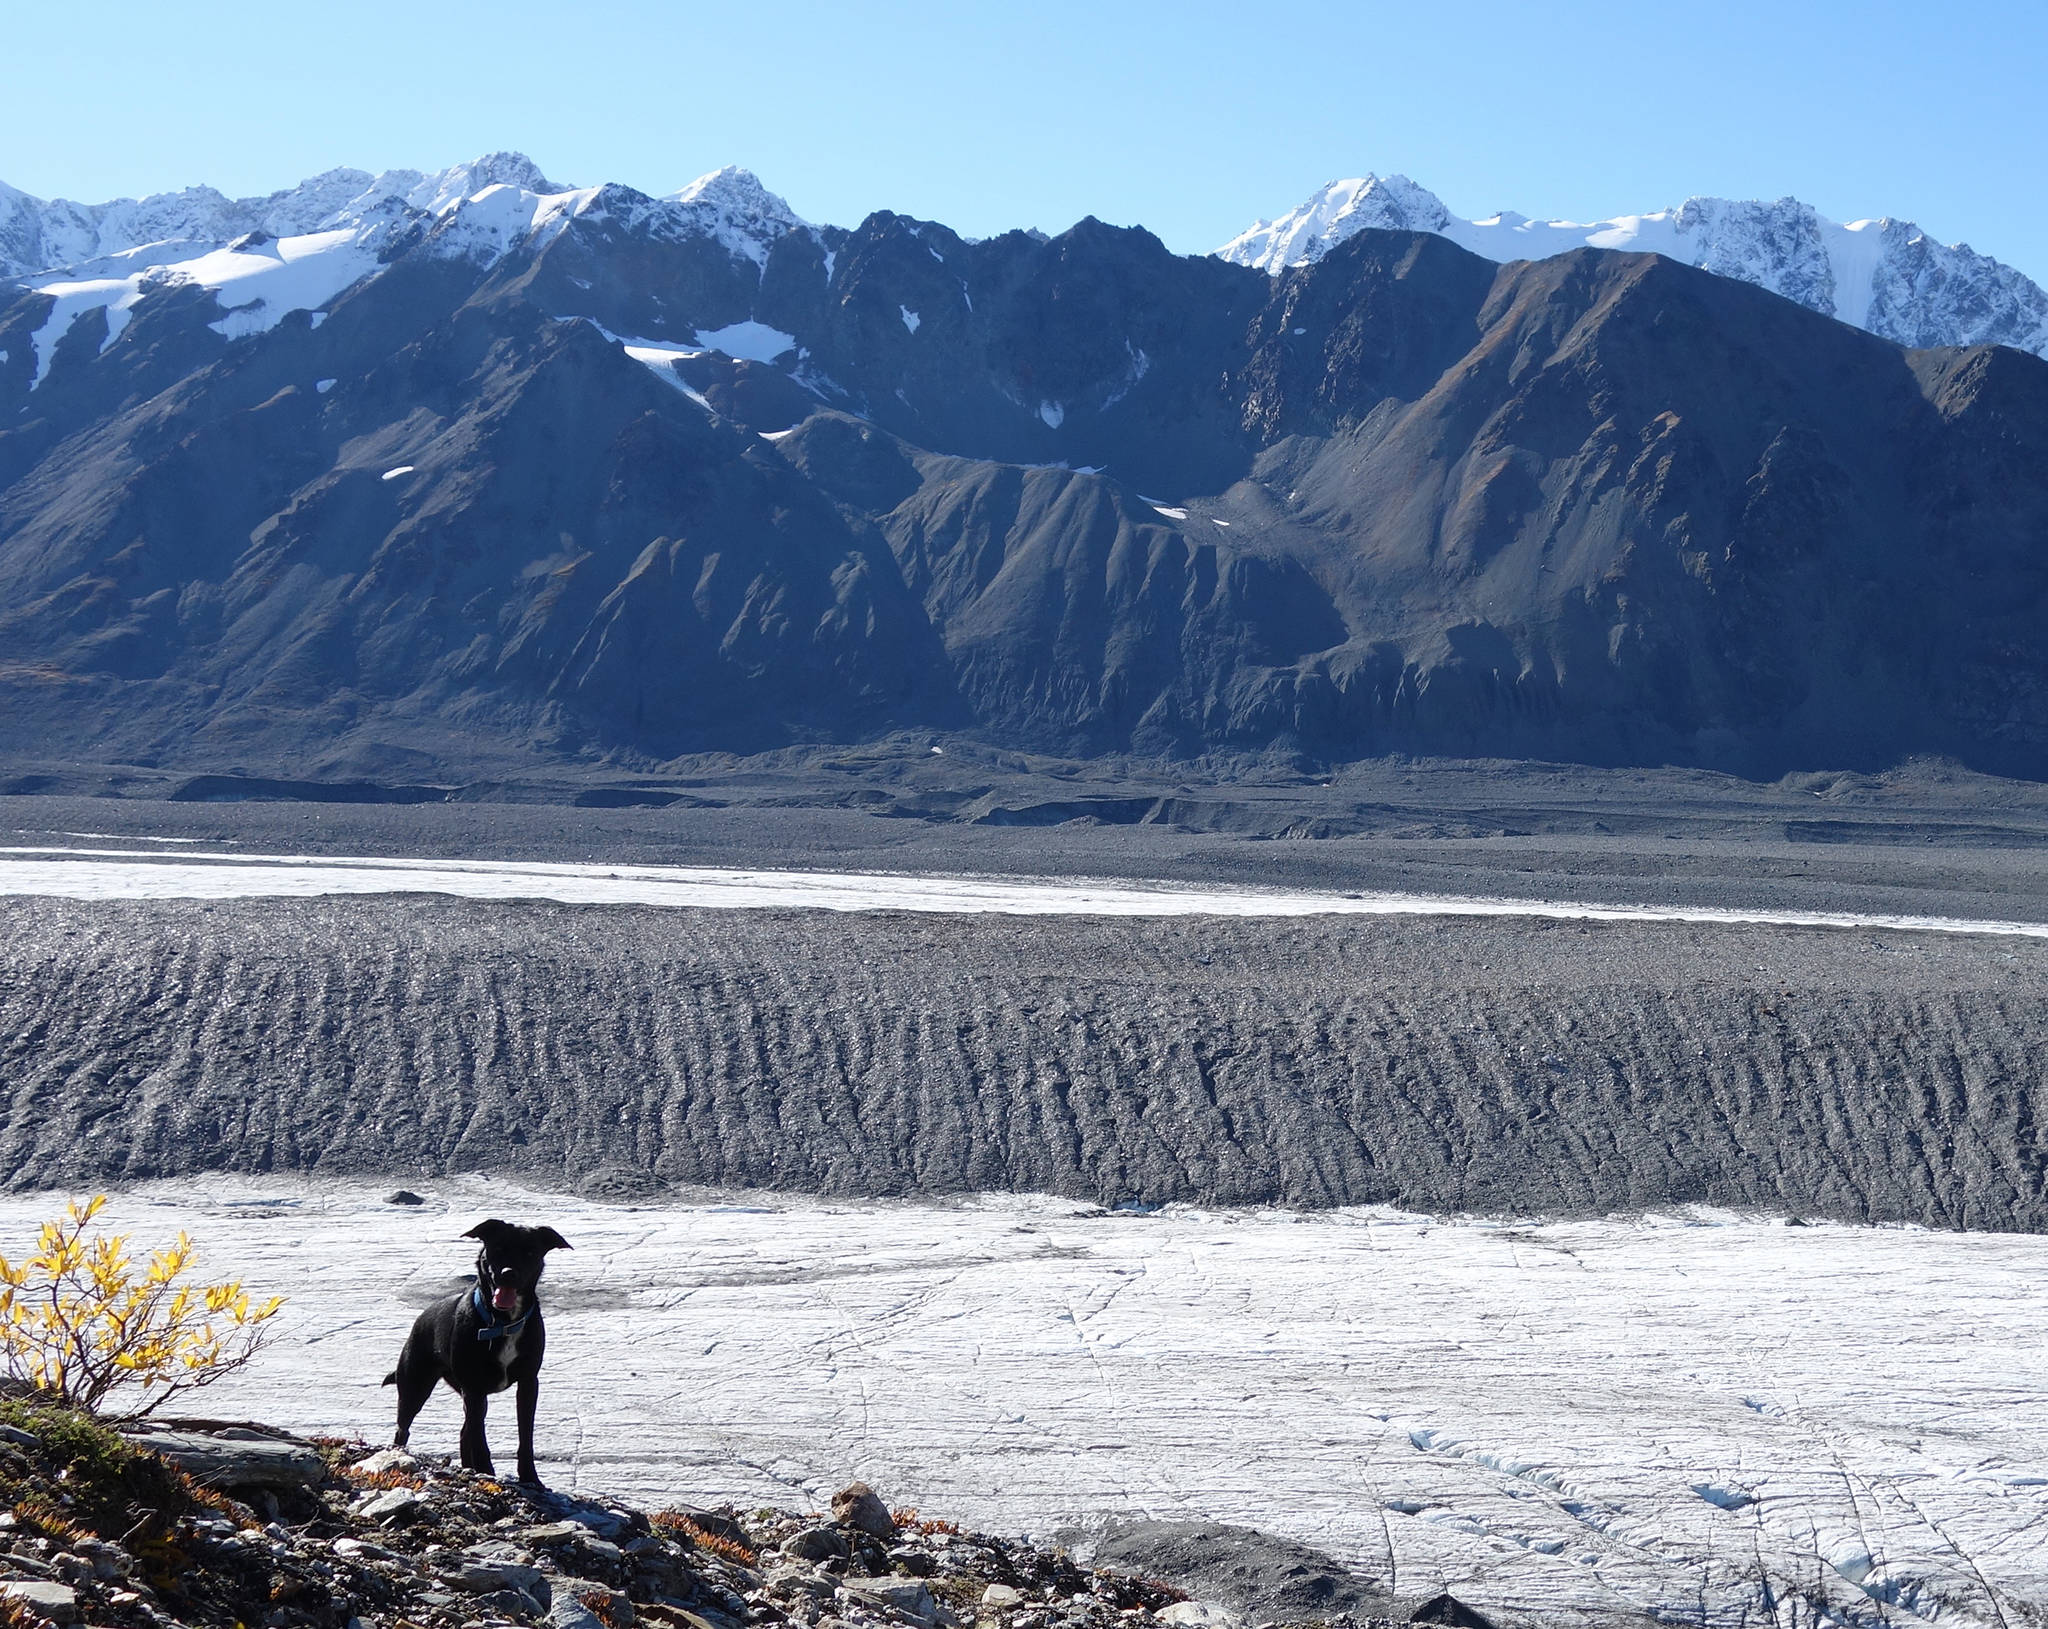 Canwell Glacier in the Alaska Range is one of many Alaska glaciers covered in large part by rocks, which can insulate the ice from warm air. (Courtesy Photo | Ned Rozell)